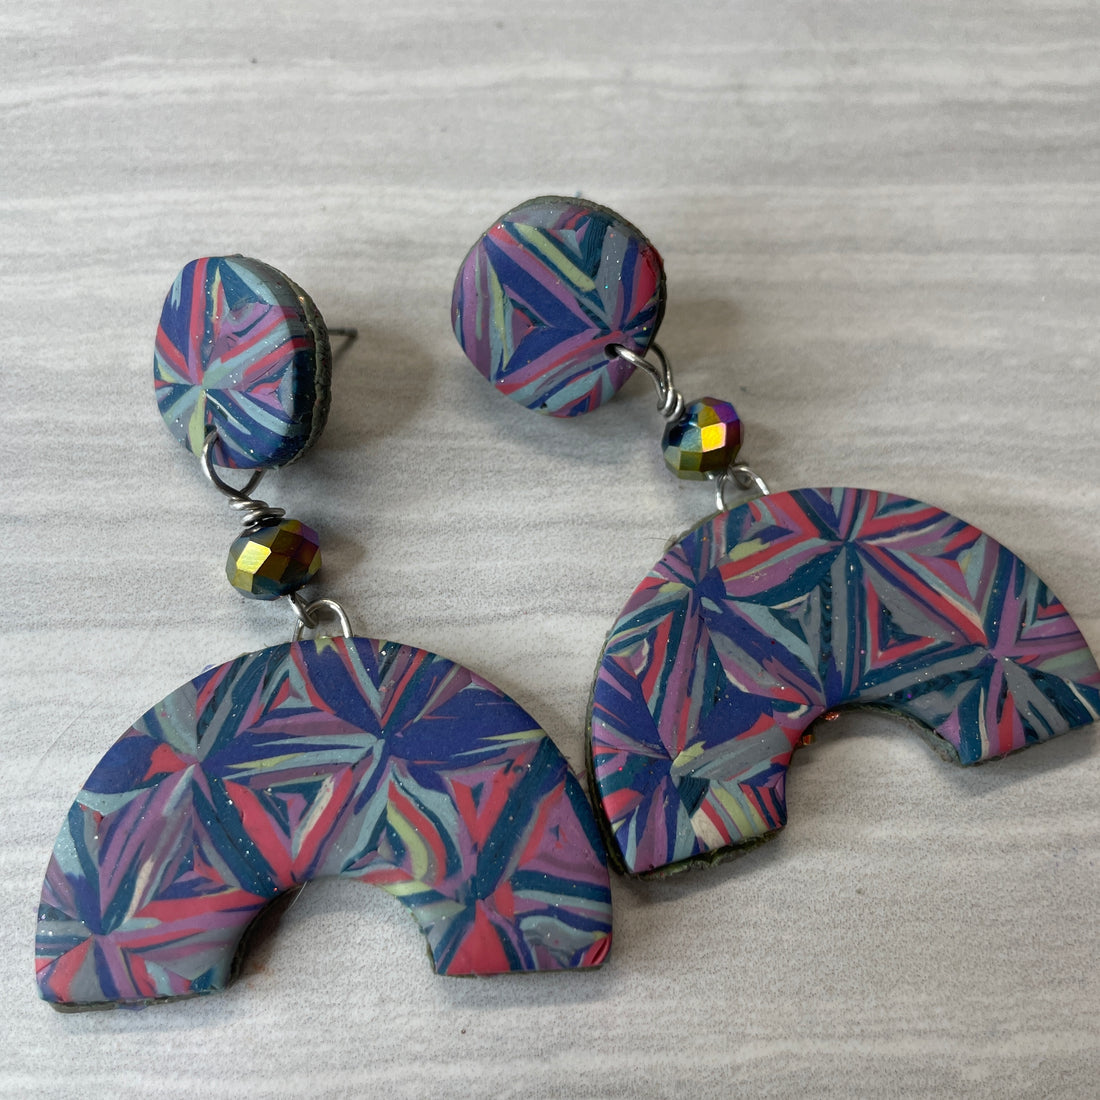 How to use the Create Template to make quilted pattern polymer clay earrings